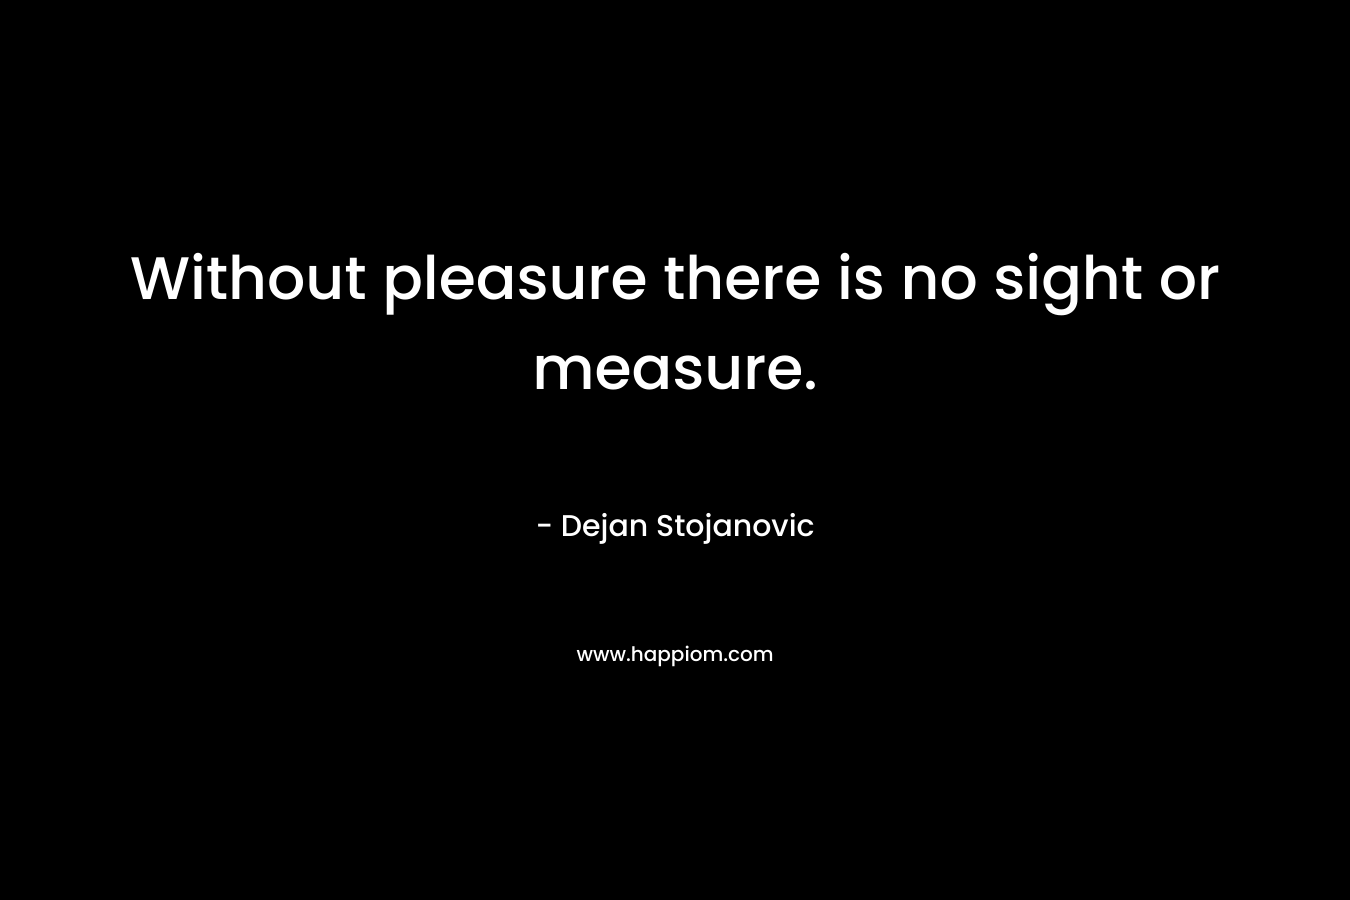 Without pleasure there is no sight or measure.